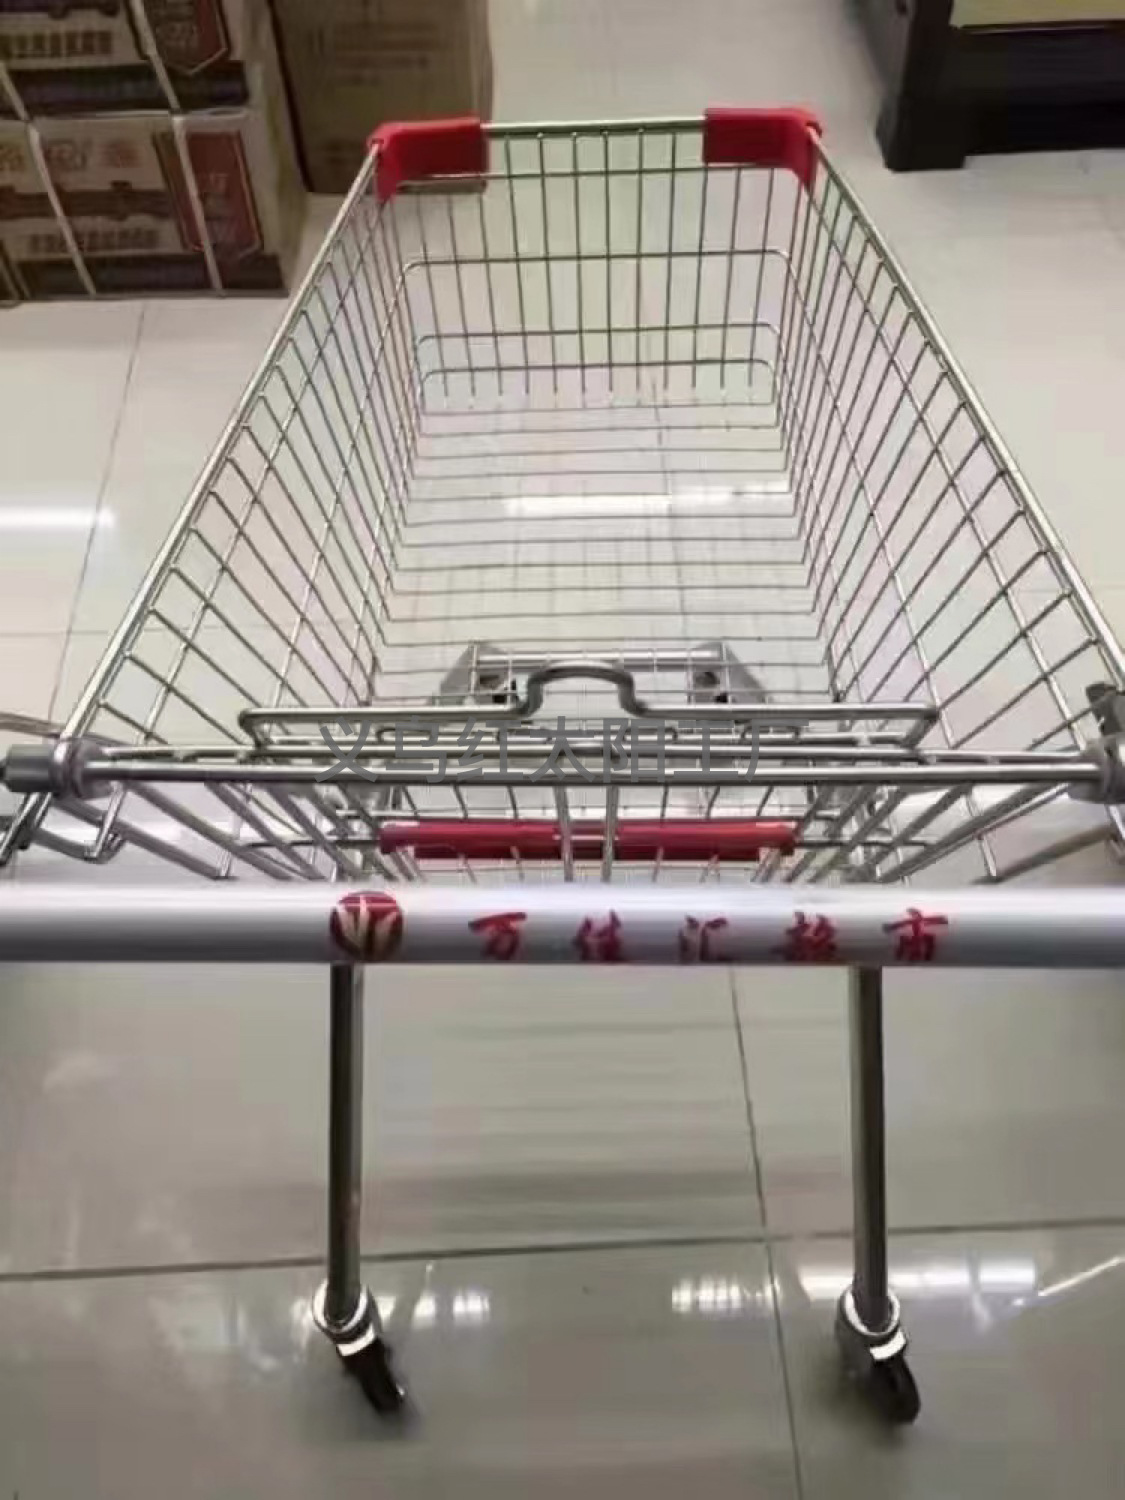 1 Red Sun Supermarket Trolley Can Sit on the Big People's Congress RT-MART Yonghua General Assembly Shopping Mall Trolley Channel